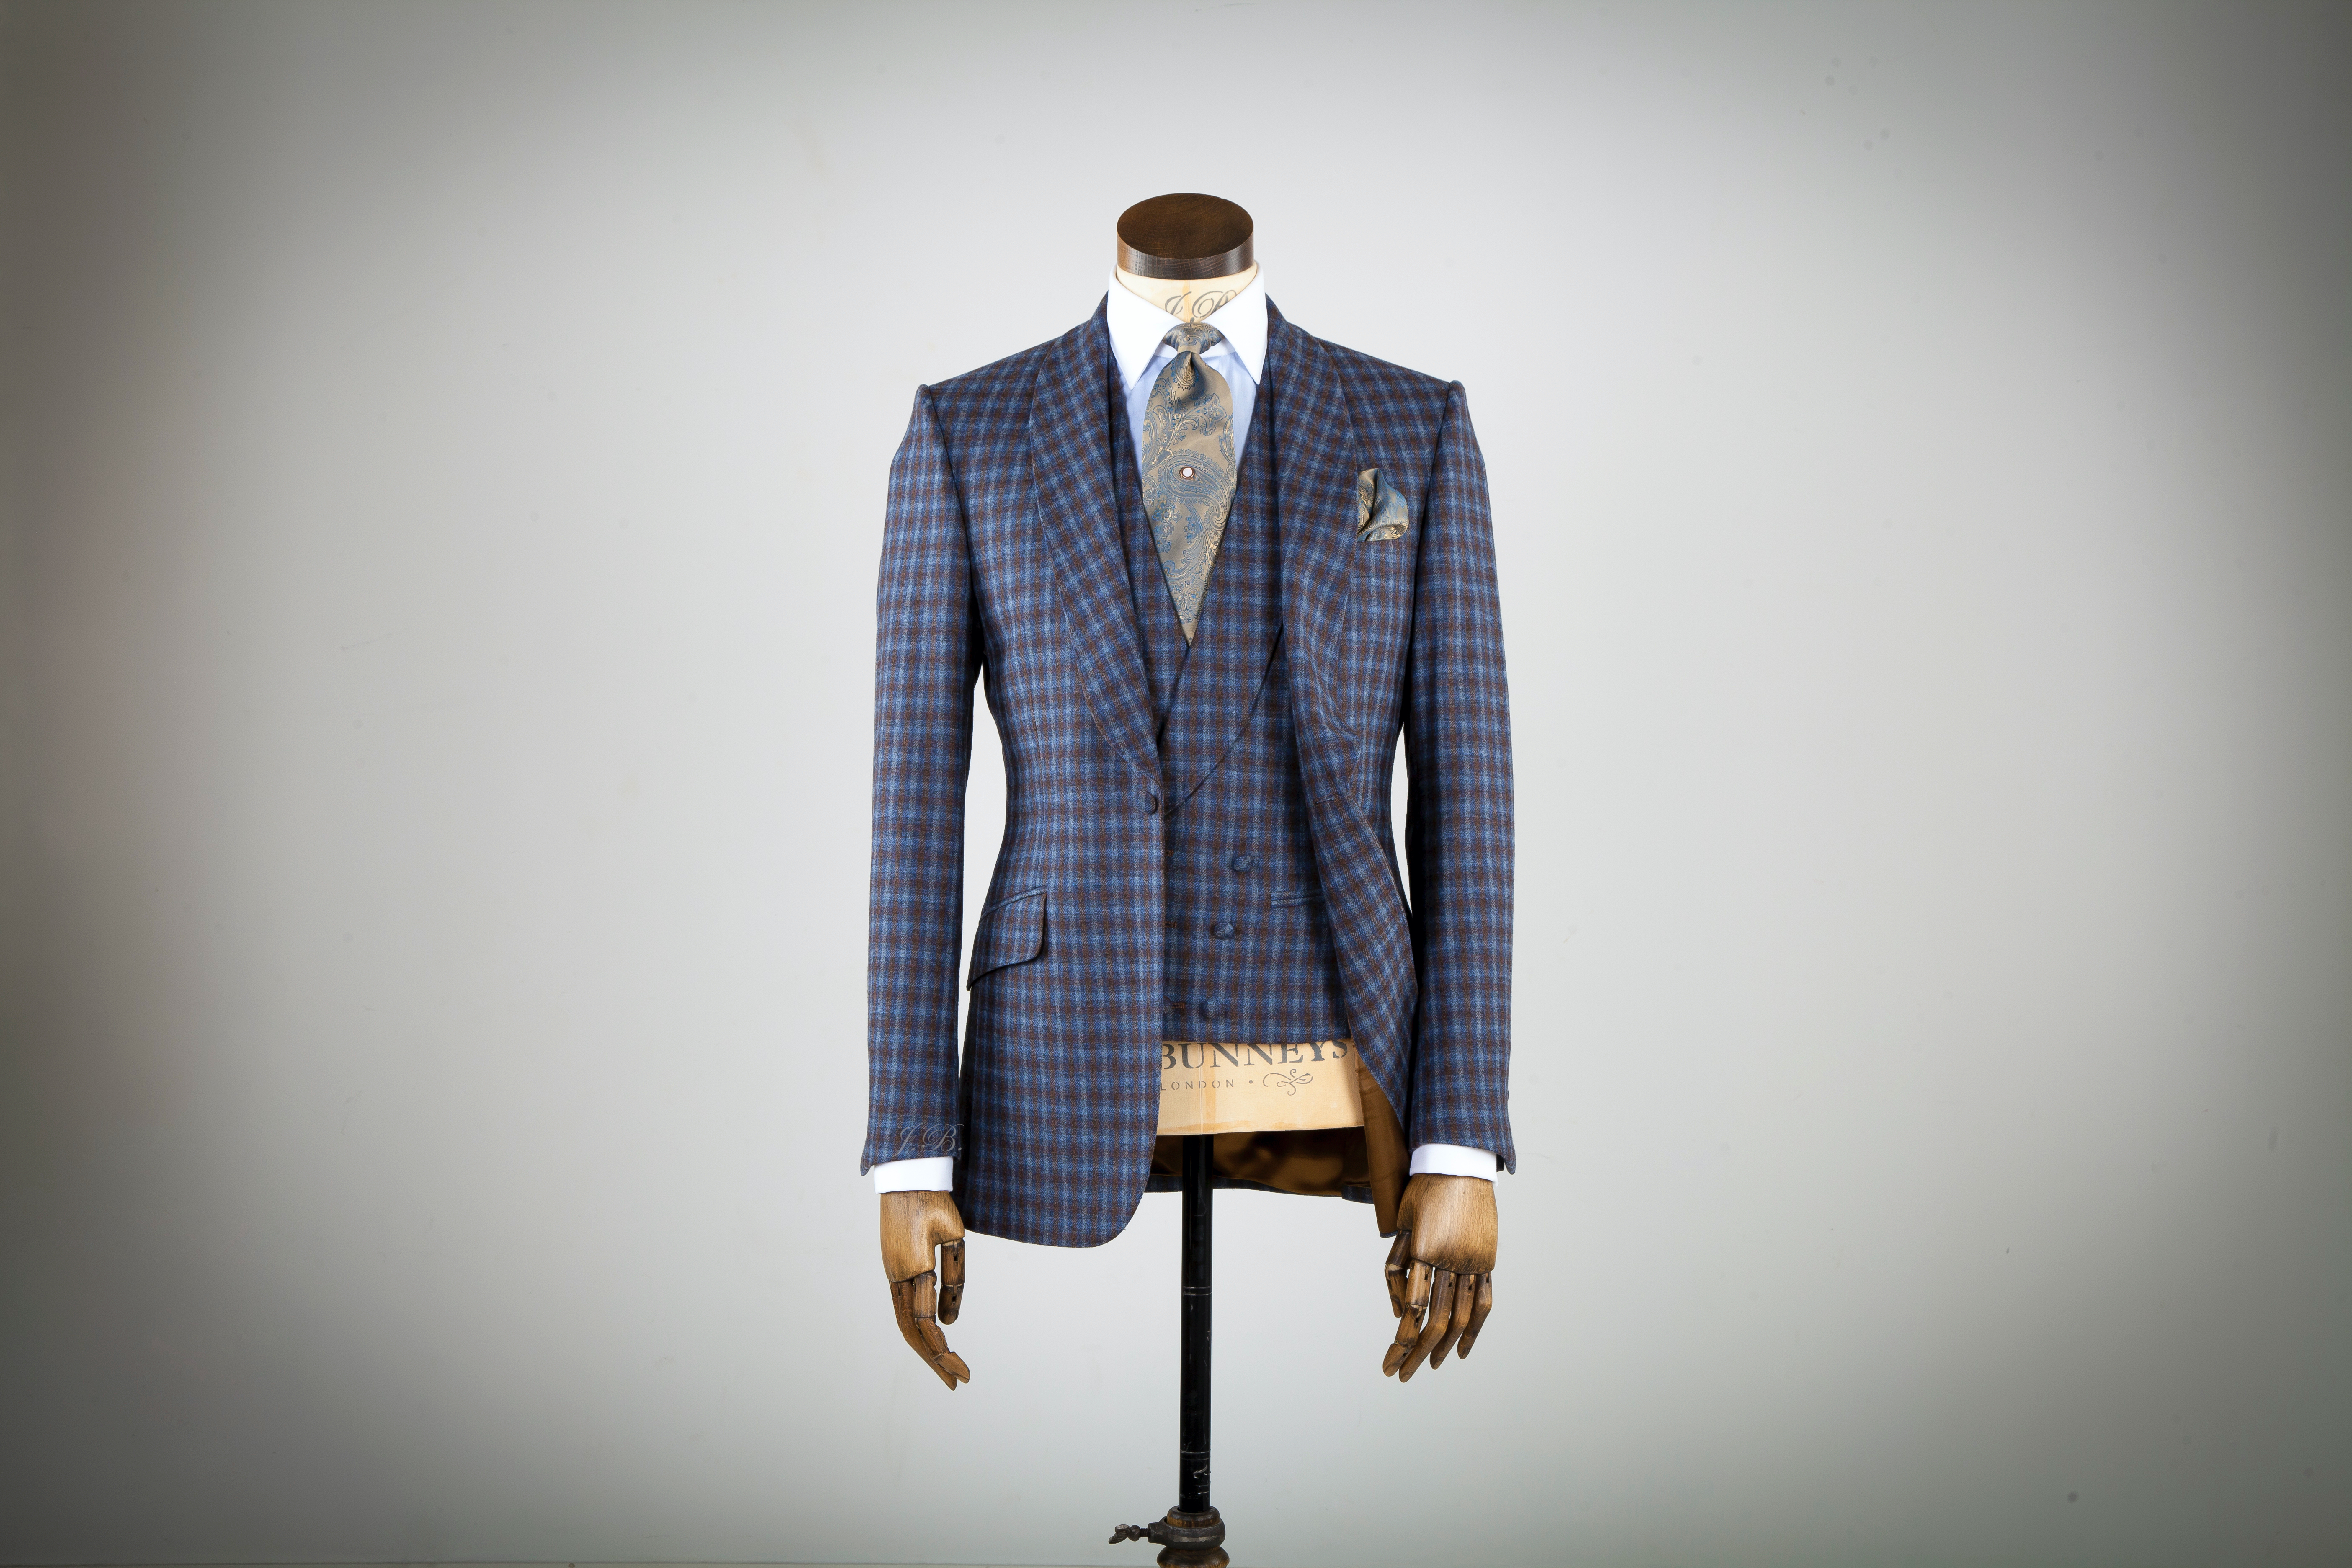 2020 wedding suit trend for bold check suits